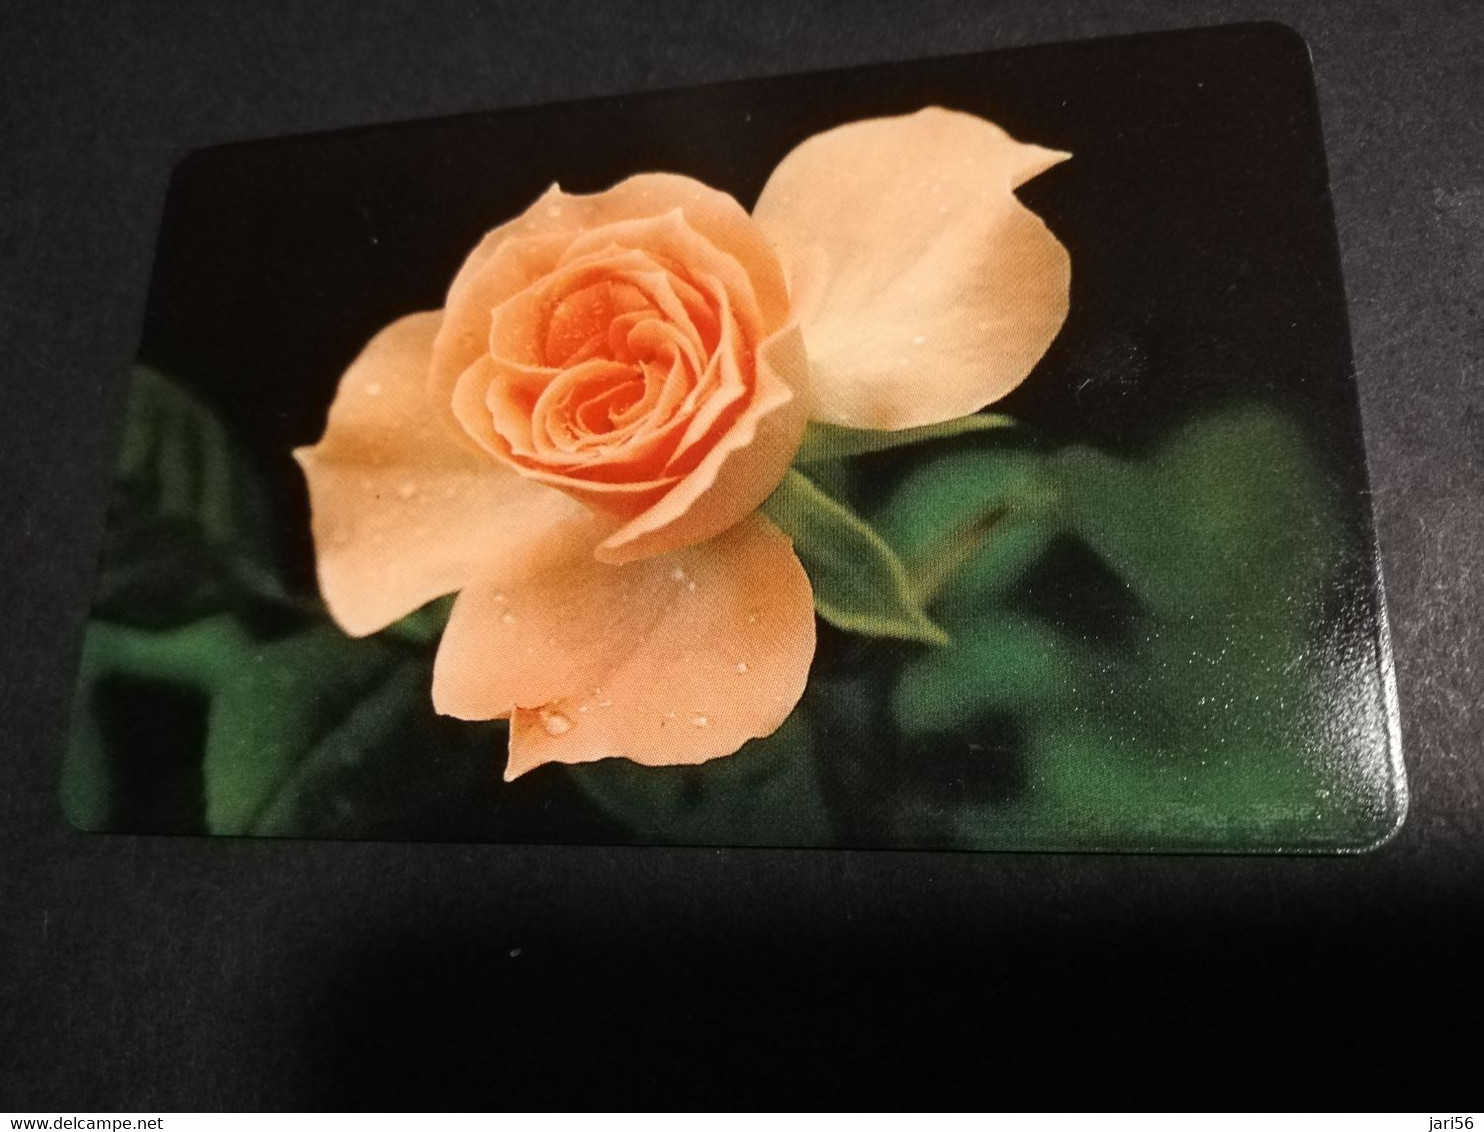 GREAT BRETAGNE  CHIPCARDS / TRIAL CARD 10 POUND   4438 BT / BACKSIDE ROSE /FLOWER PERFECT  CONDITION      **4454** - BT Generales